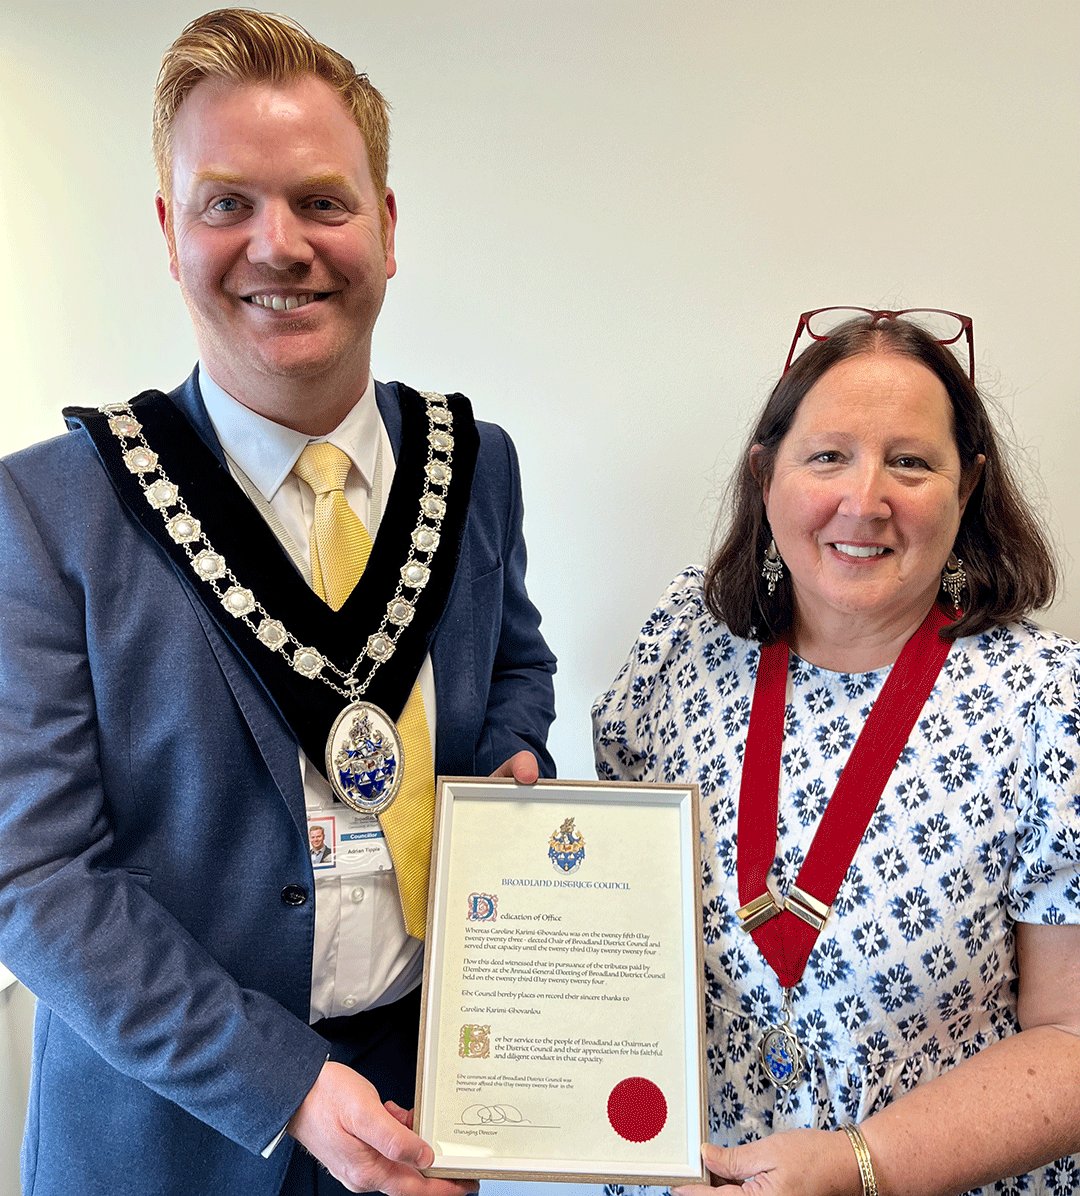 Last night at Broadland District Council’s AGM Cllr Adrian Tipple was elected as the new Chair of the Council. Cllr Tipple presented Cllr Caroline Karimi-Ghovanlou with a testimonial in recognition of her services to the Council, as Chair.